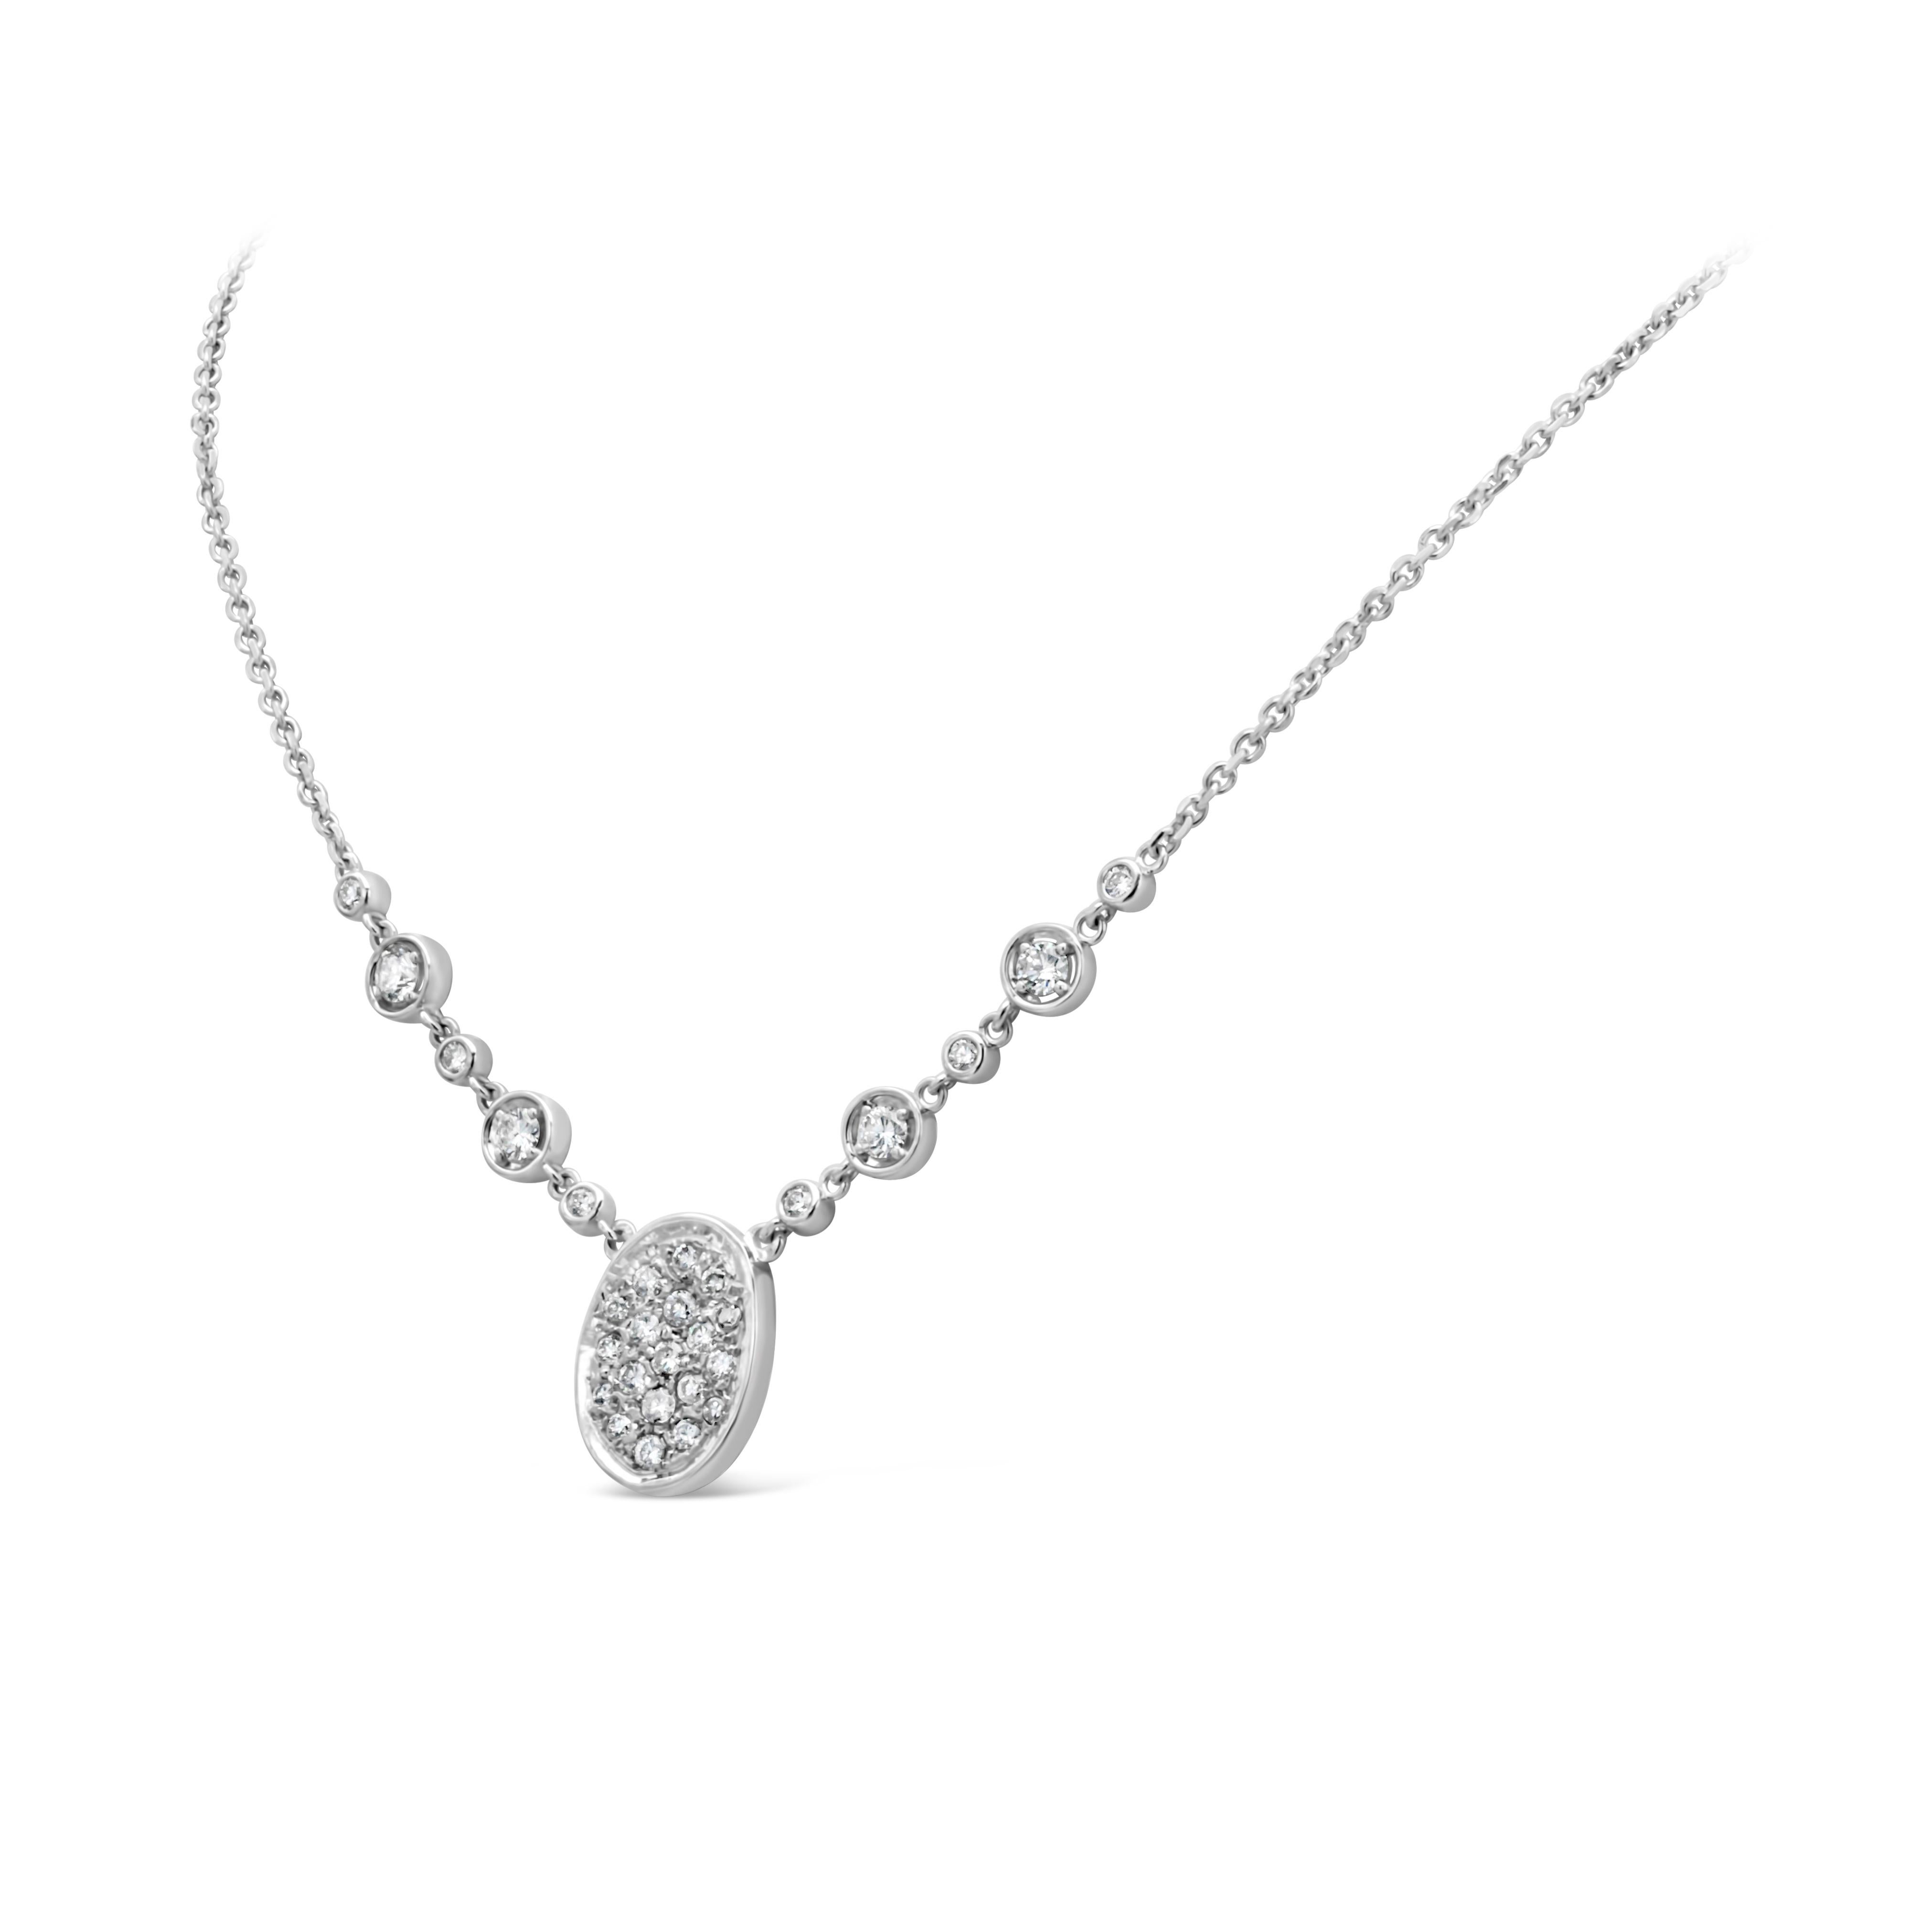 Contemporary 1.24 Carats Total Round Cut Diamond Fashion Pendant Necklace For Sale